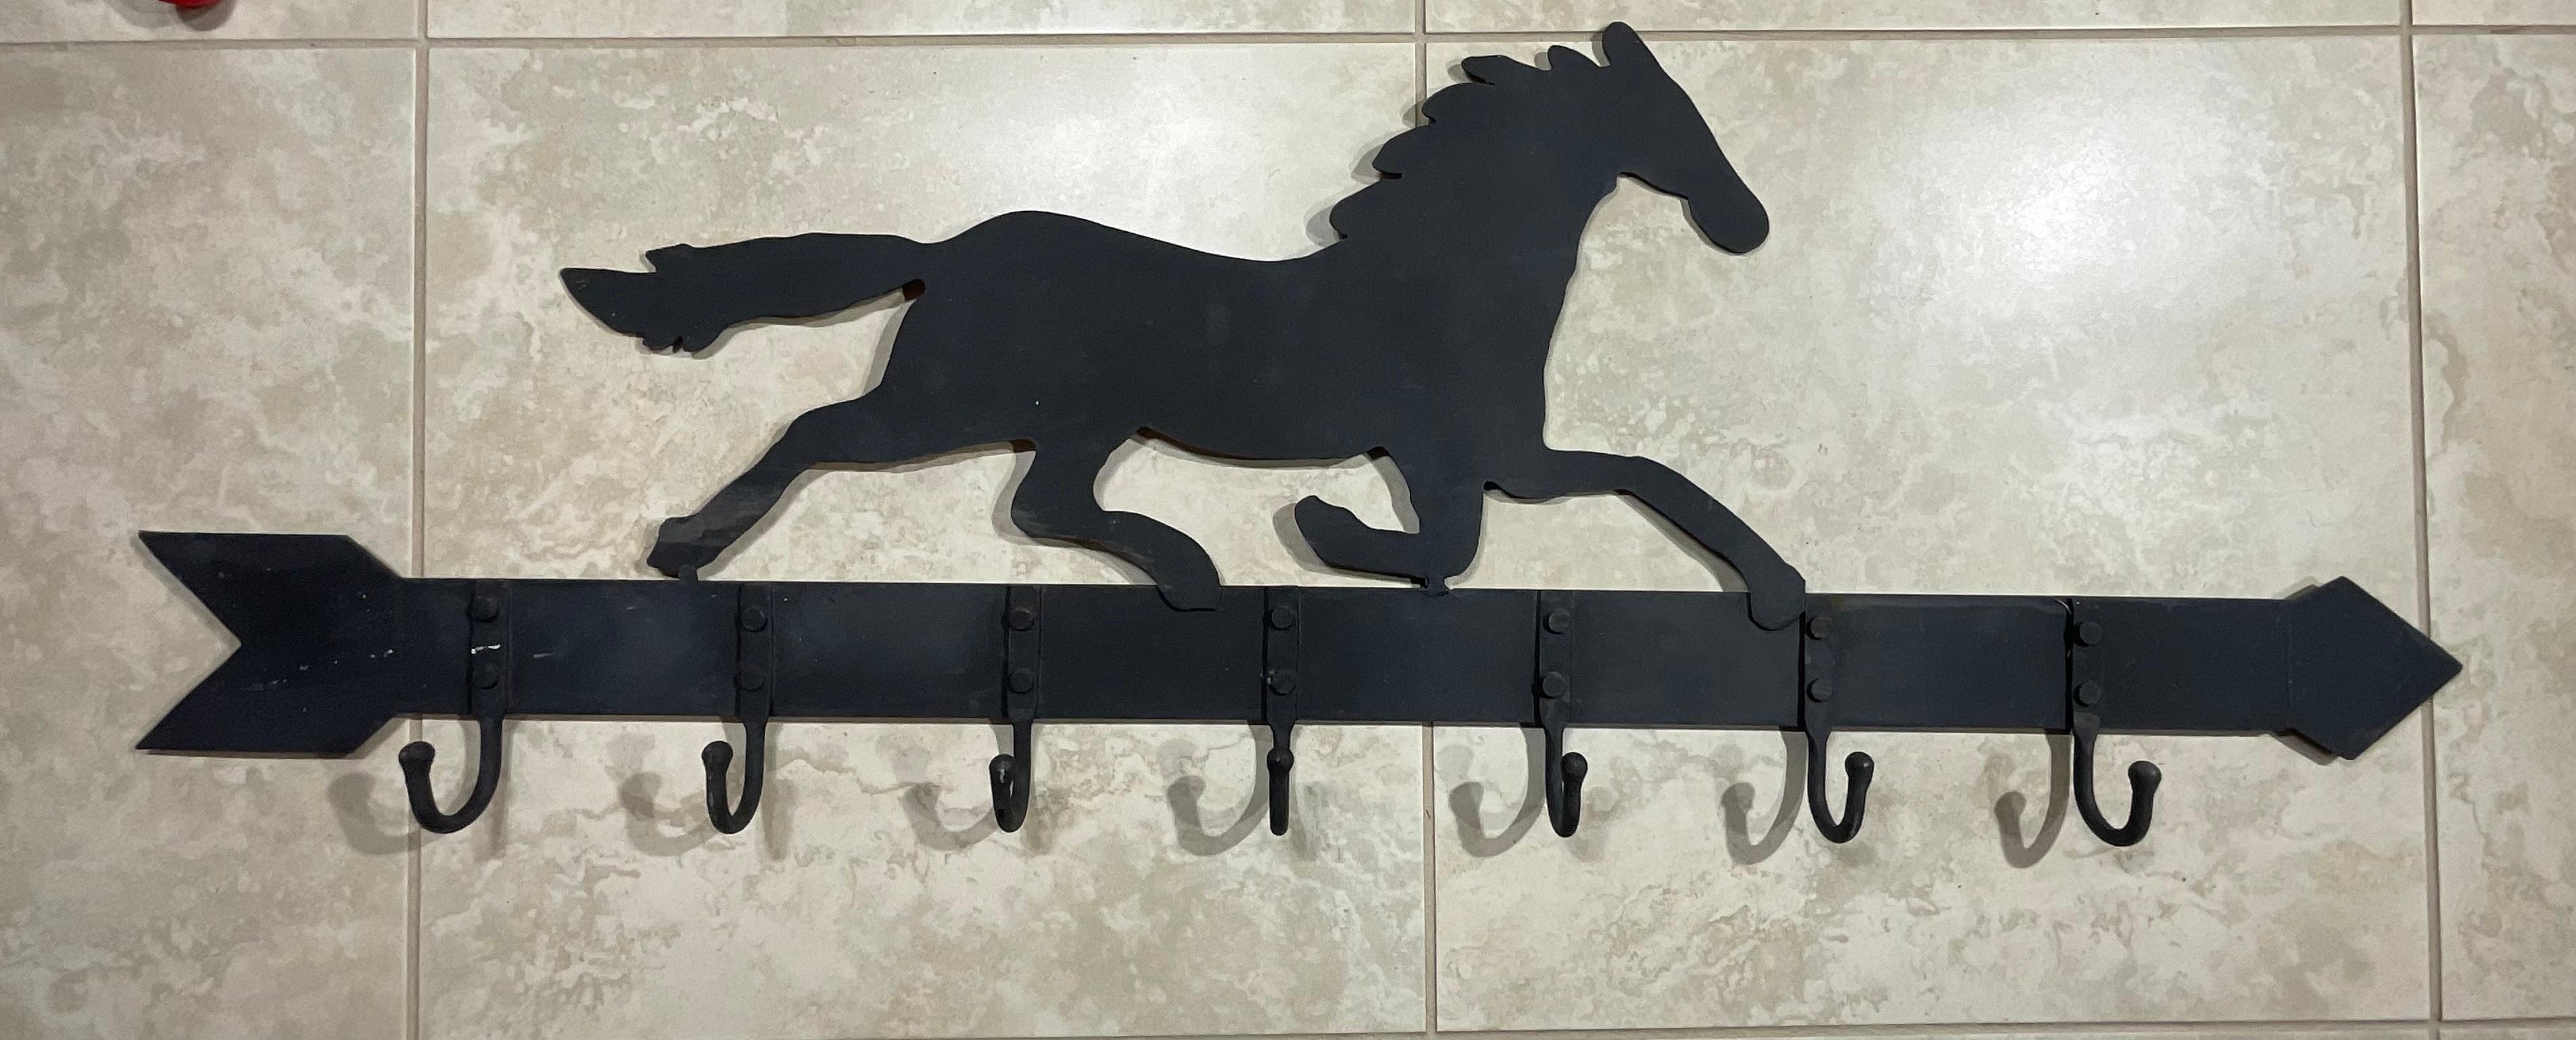 Artistic Equestrian Metal Sculpture or Wall Bracket For Sale 4